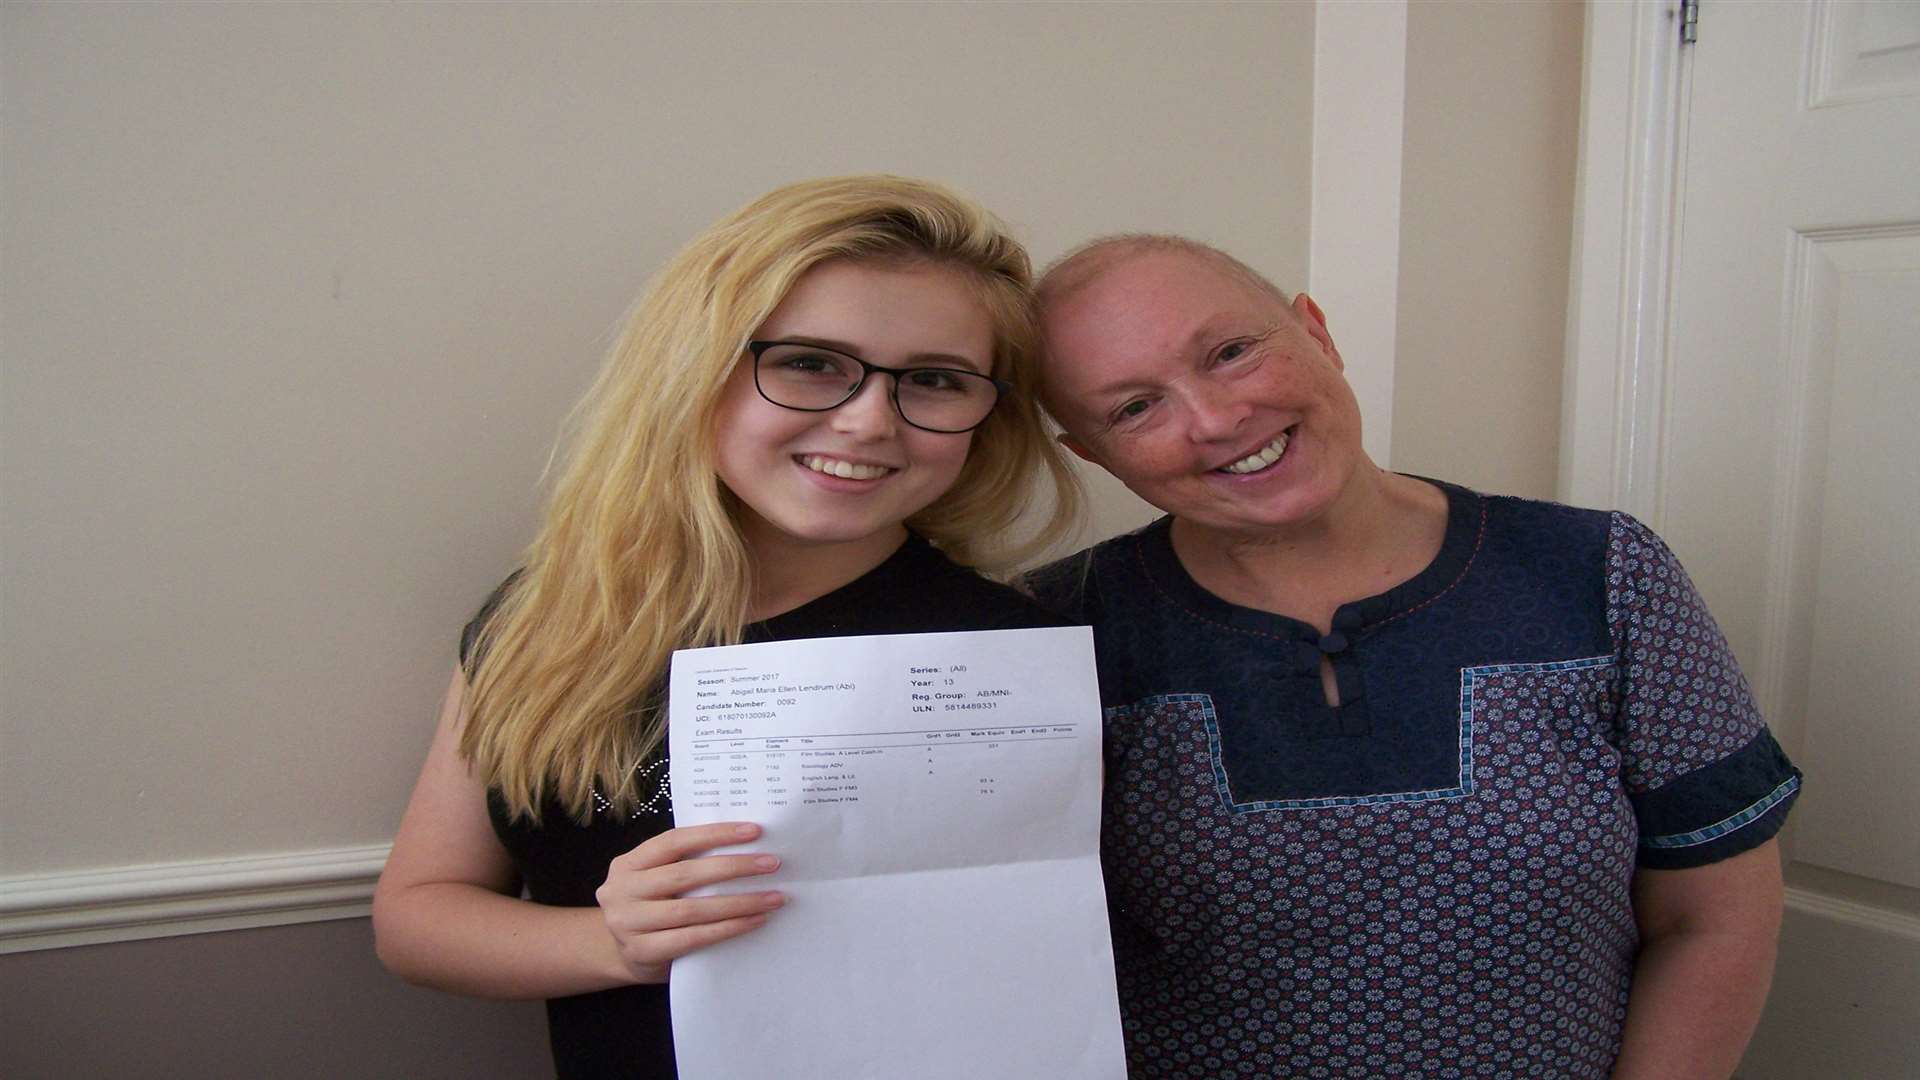 Abi Lendrum celebrates her fantastic results along with her mum, Maggie